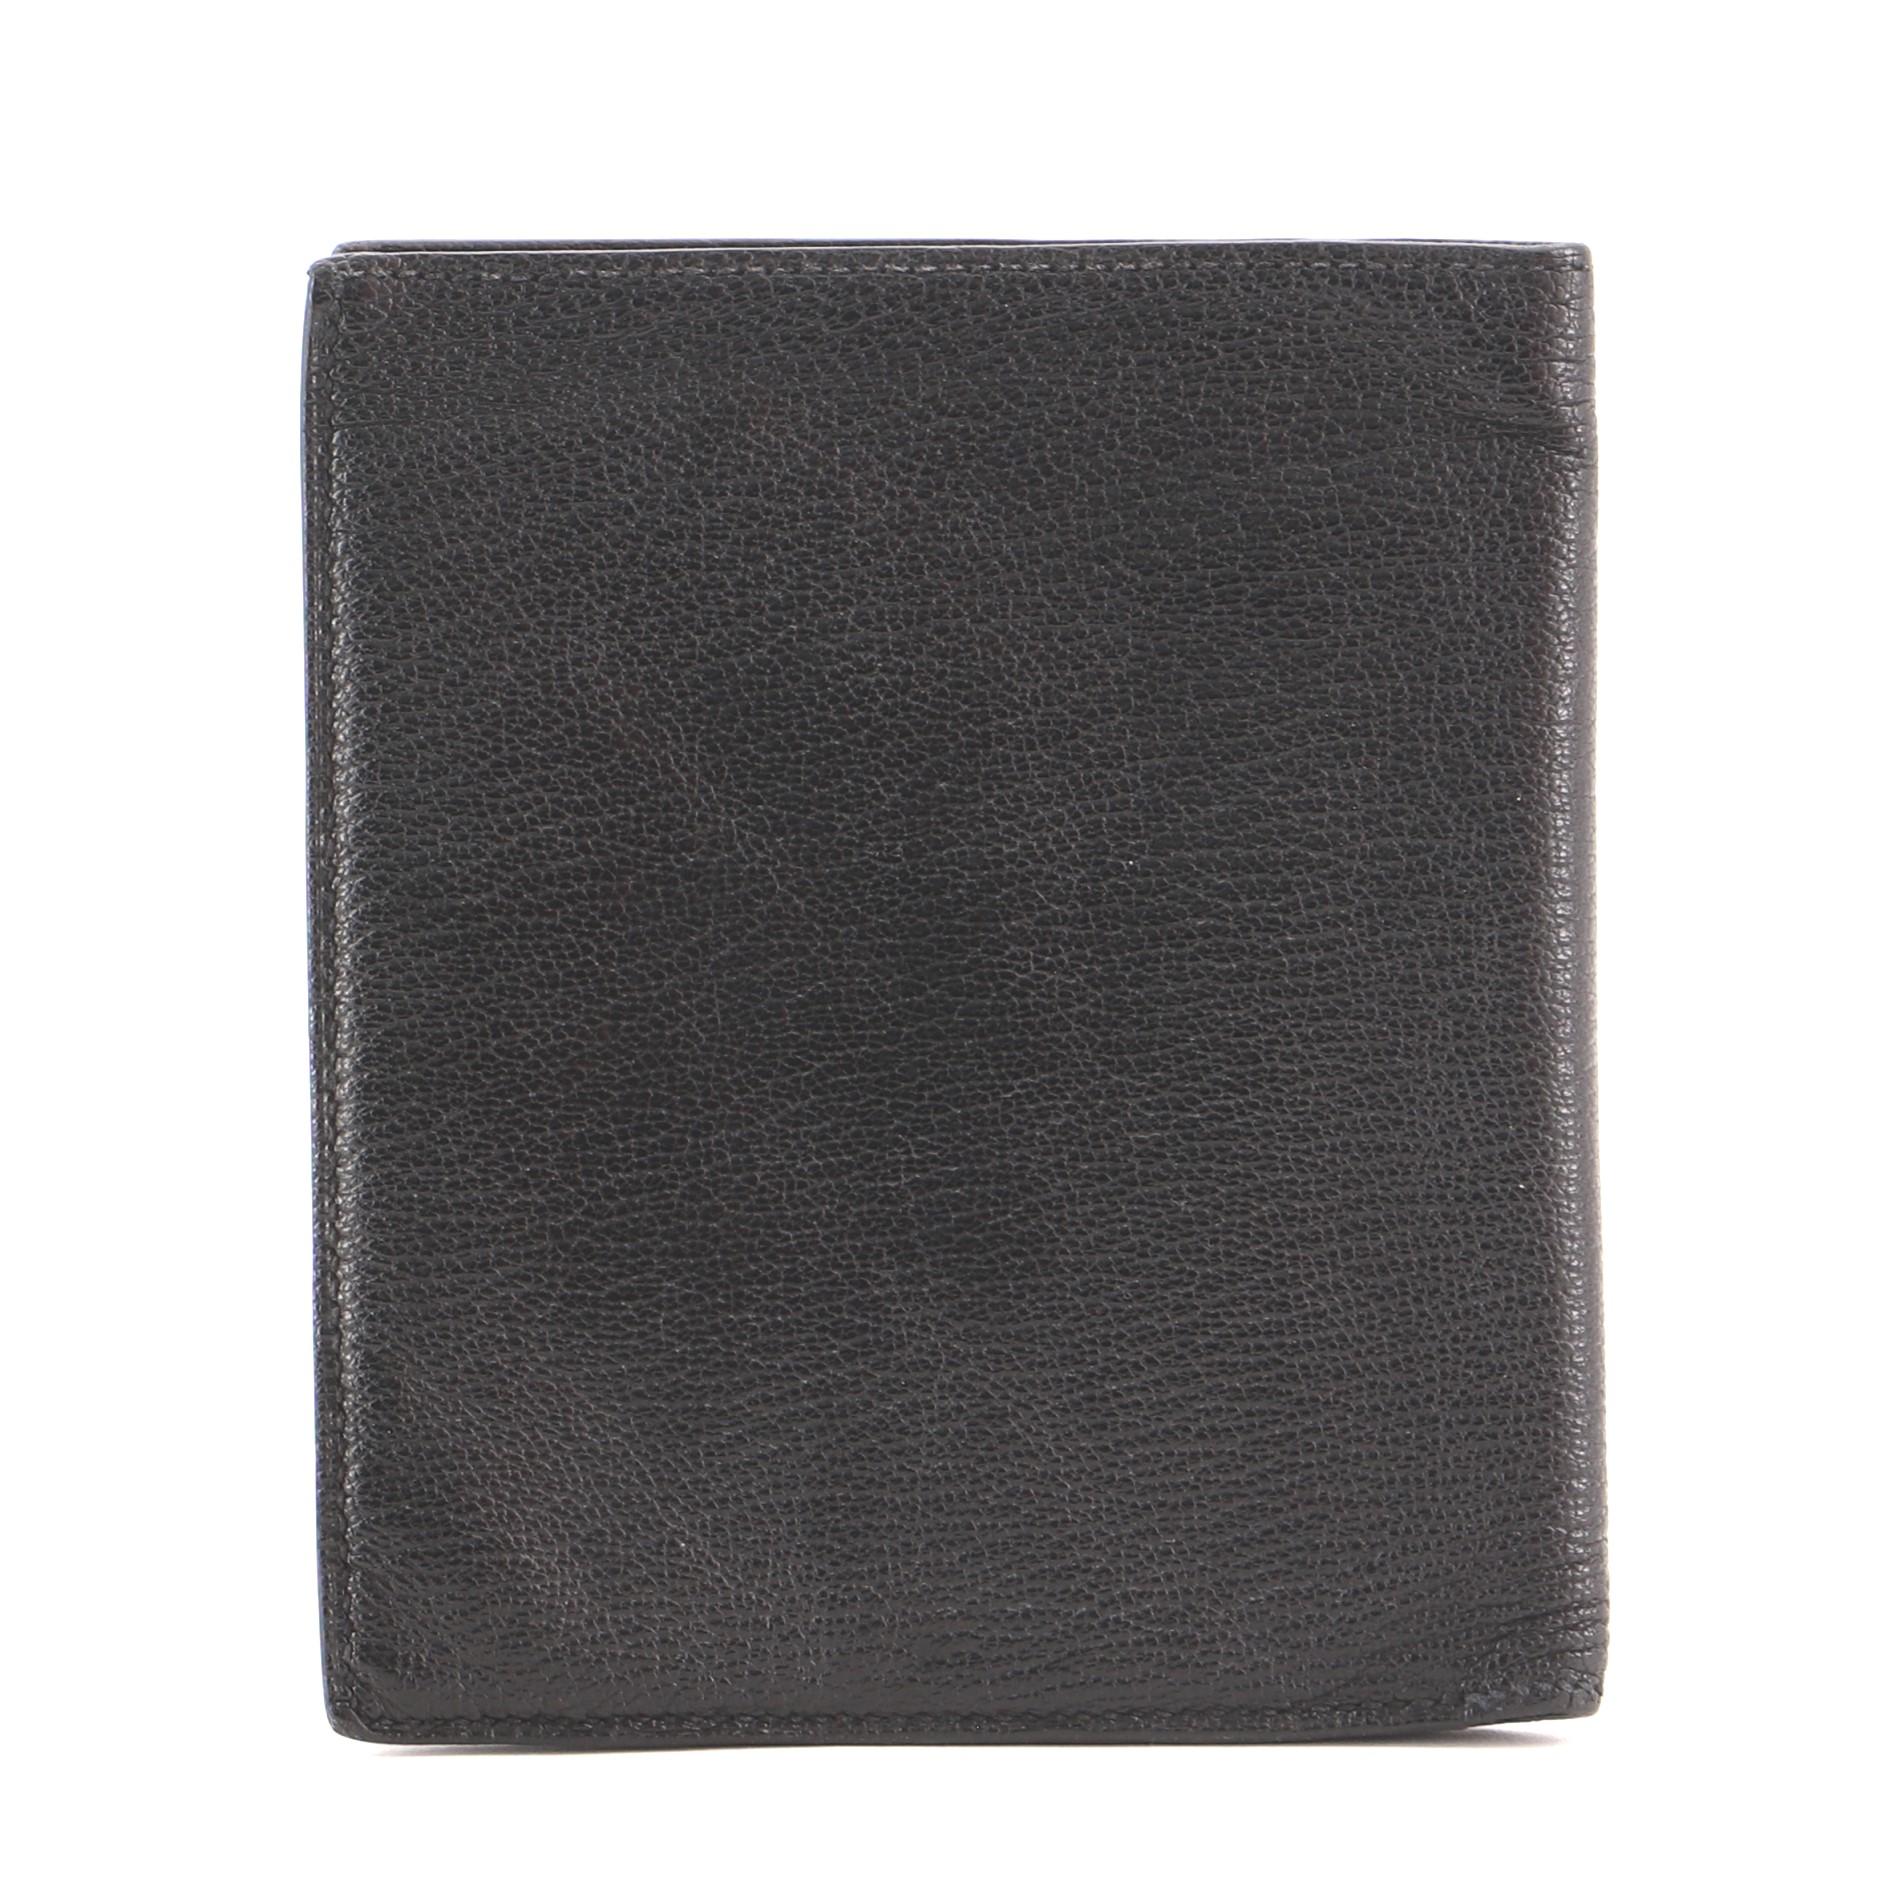 Hermes Evelyne Wallet Chevre Mysore Compact
Black Chevre Mysore

Condition Details: Moderate wear, creasing and indentations on exterior and in interior, heavy splitting on base and opening corner wax edges.

49783MSC

Height 5